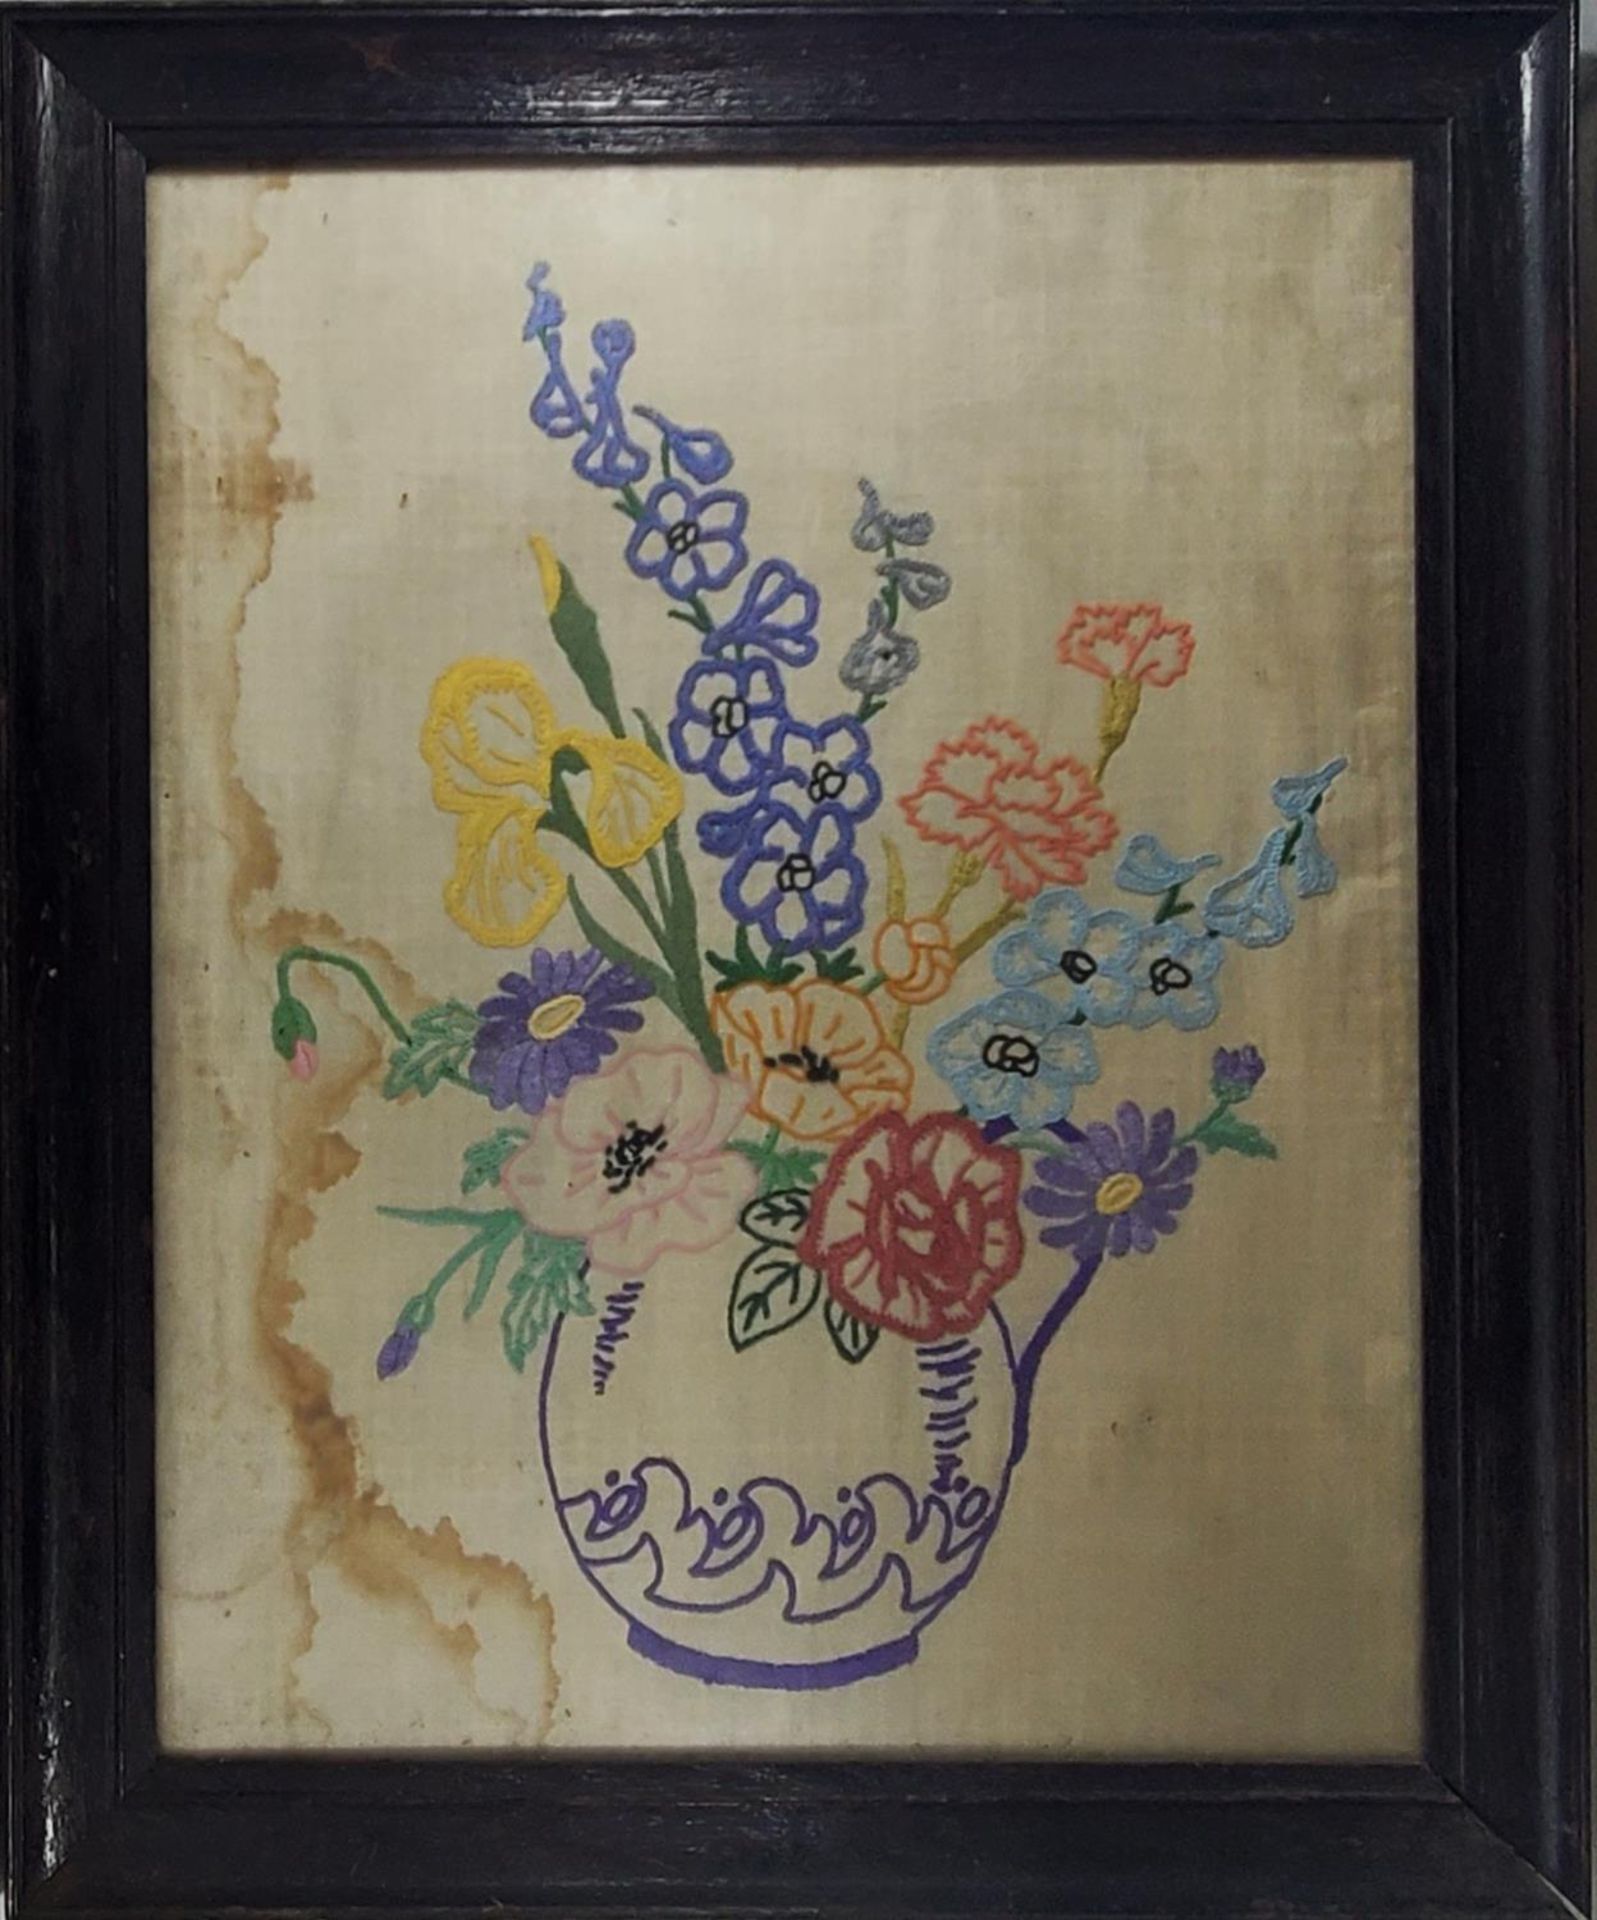 A VINTAGE NEEDLEWORK EMBROIDERY OF A VASE OF FLOWERS, FRAMED, 48CM X 59CM